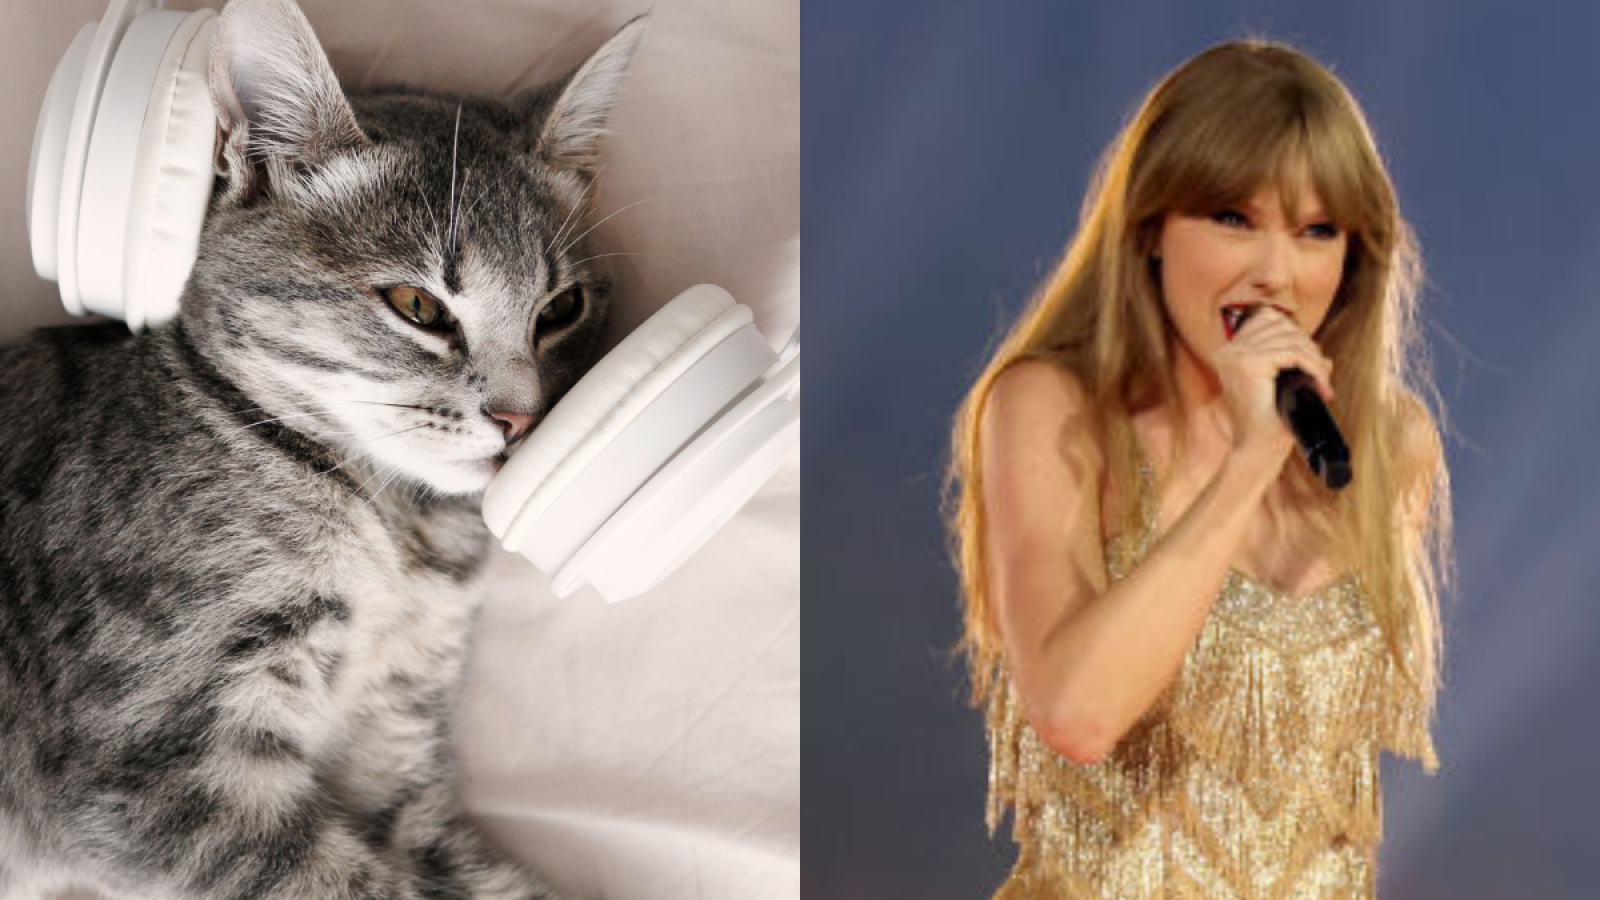 Taylor Swift Style — CATS rehearsal Anvei-Nao 'Stripe Cute Cat